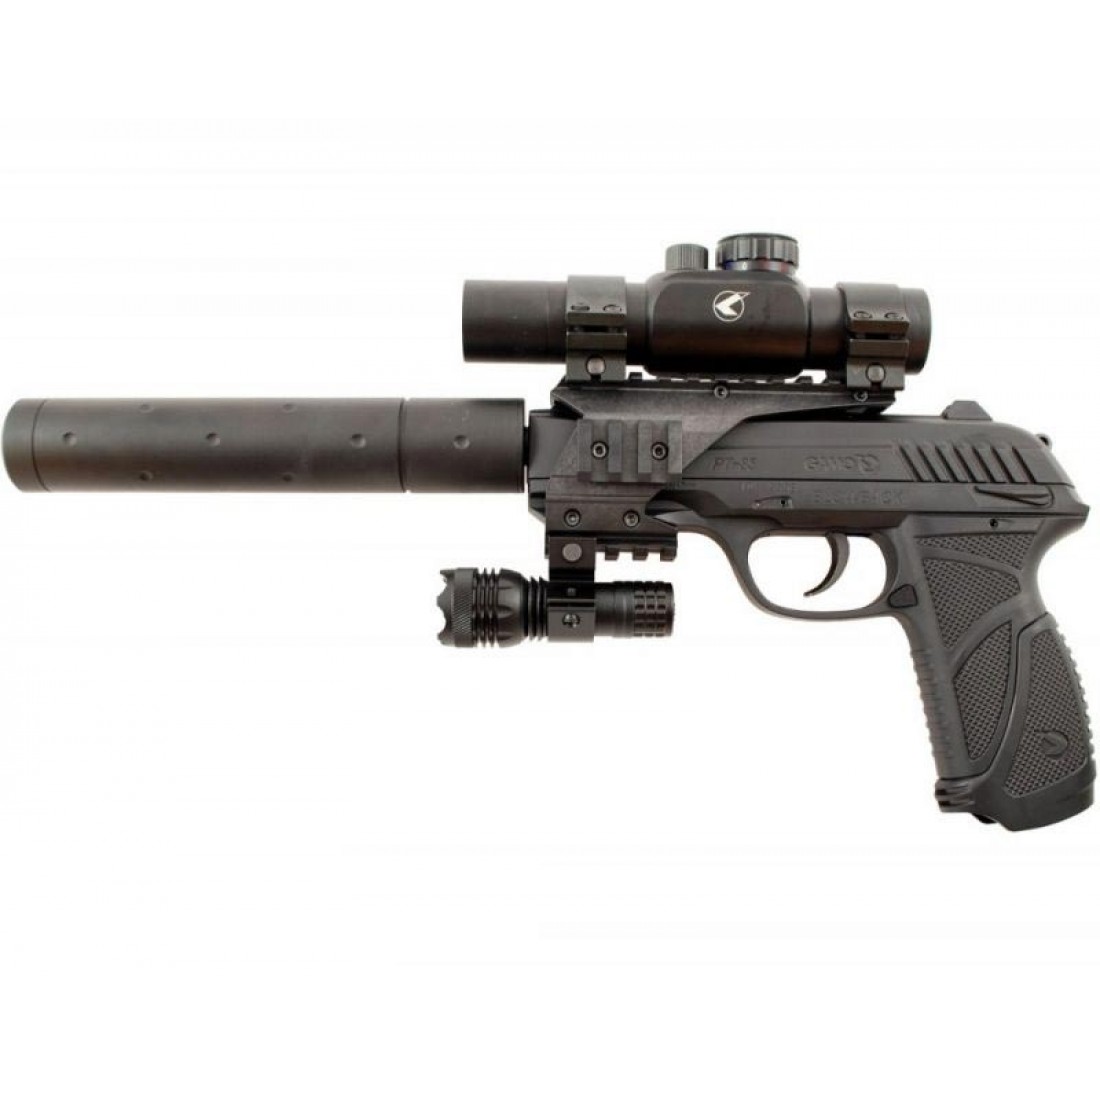 Gamo Pt 85 Blowback Tactical Pistol Co2 Delivered By Dai